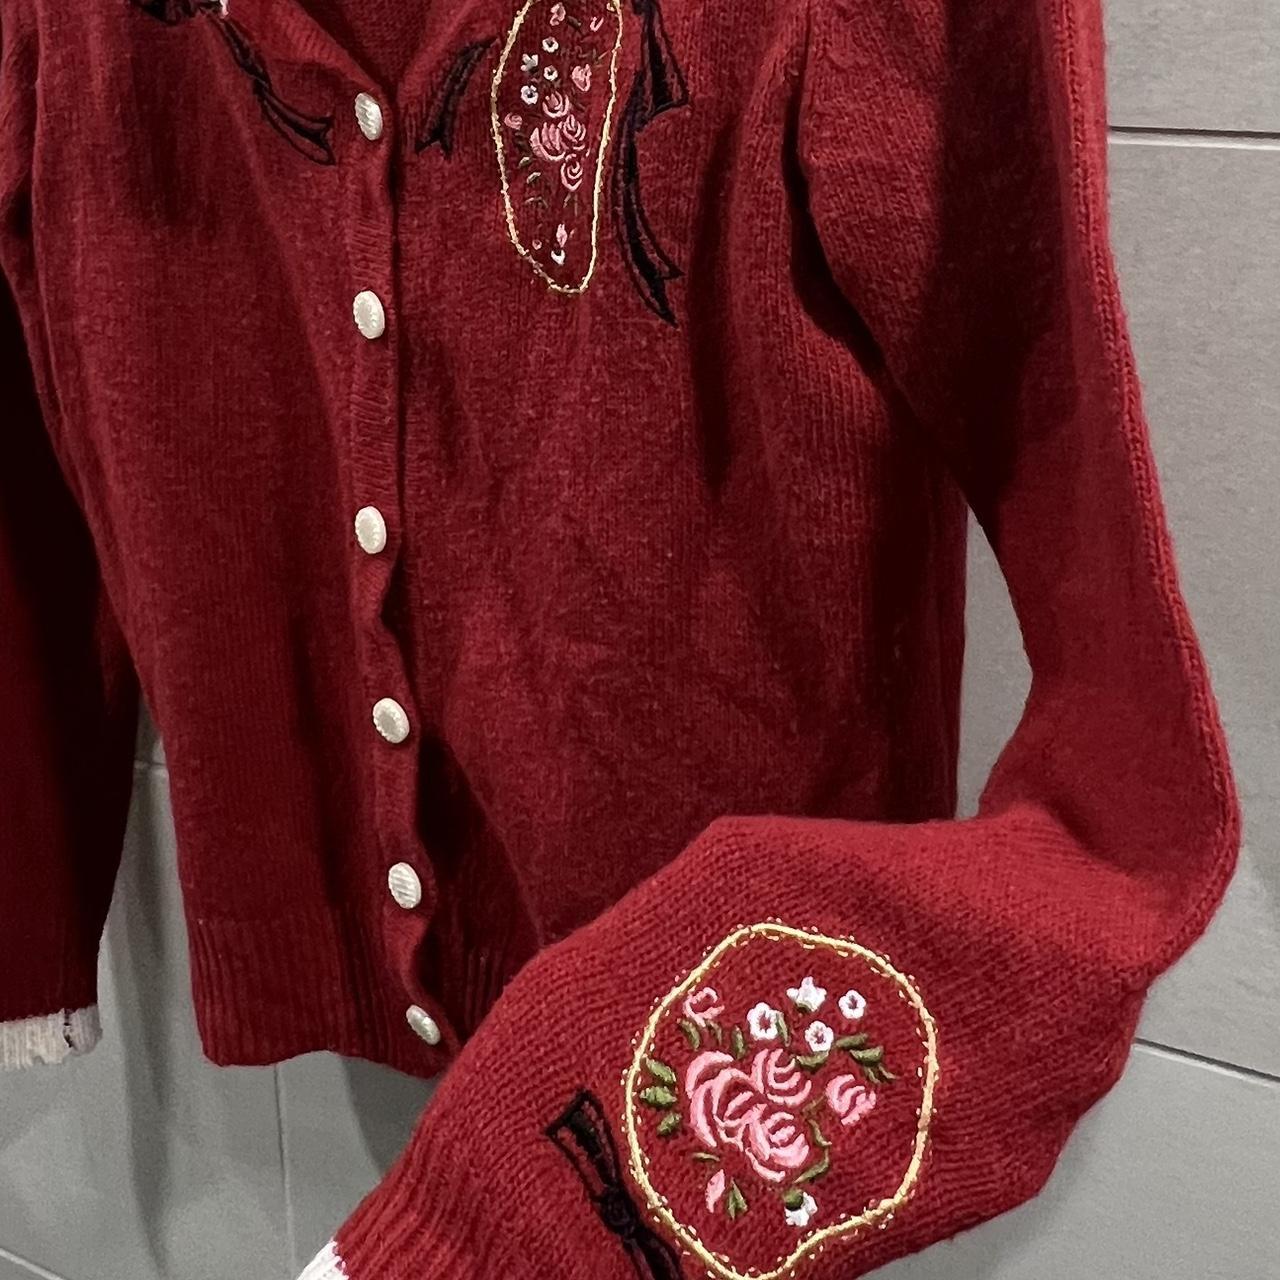 Product Image 2 - Vintage style red embroidered cardigan

Really